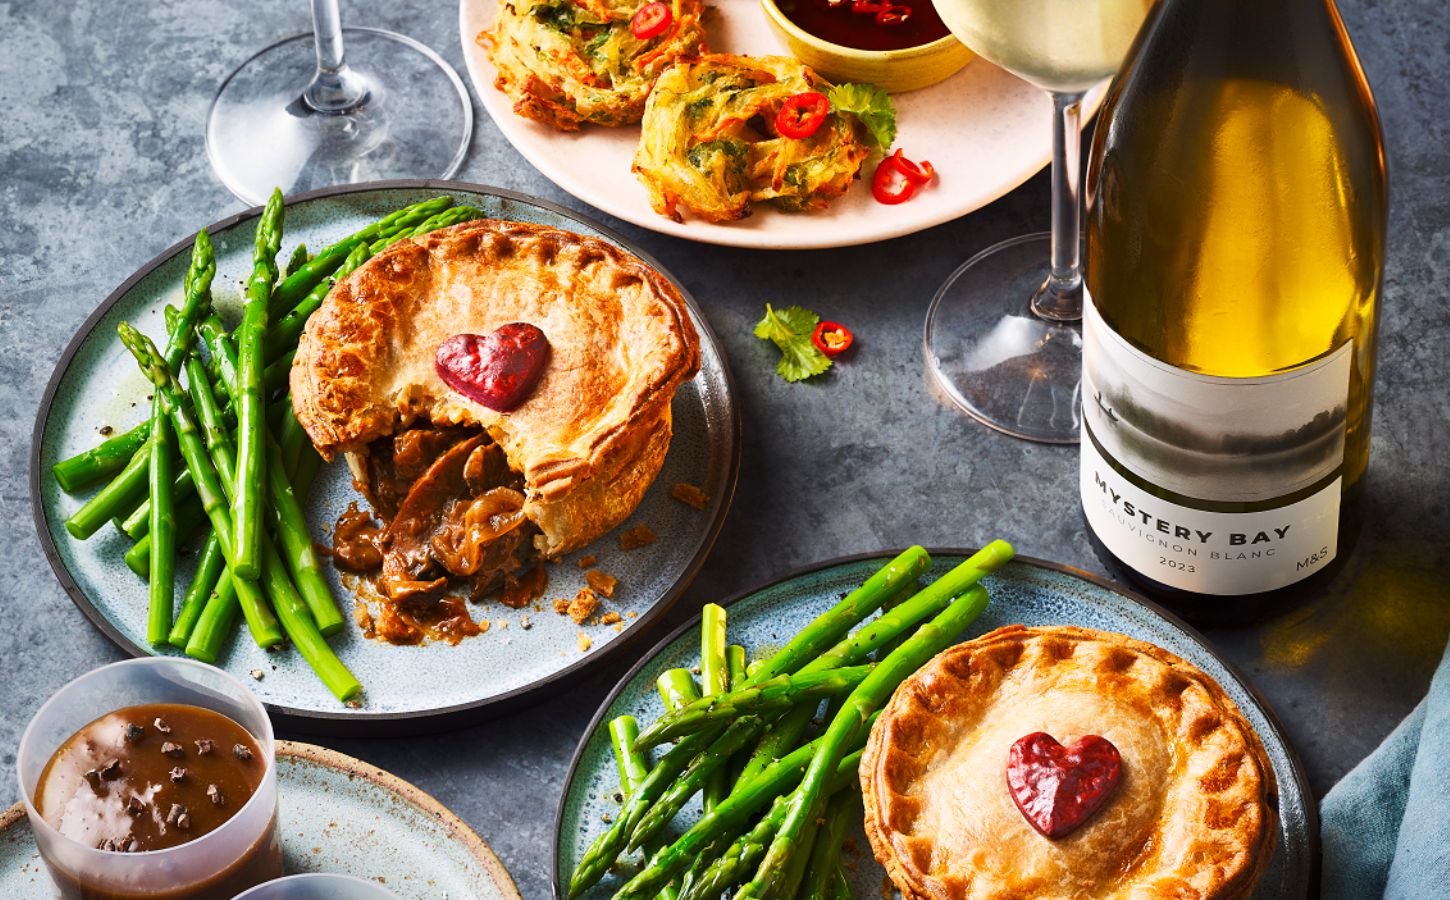 A vegan Valentine's Day meal deal from Marks and Spencer